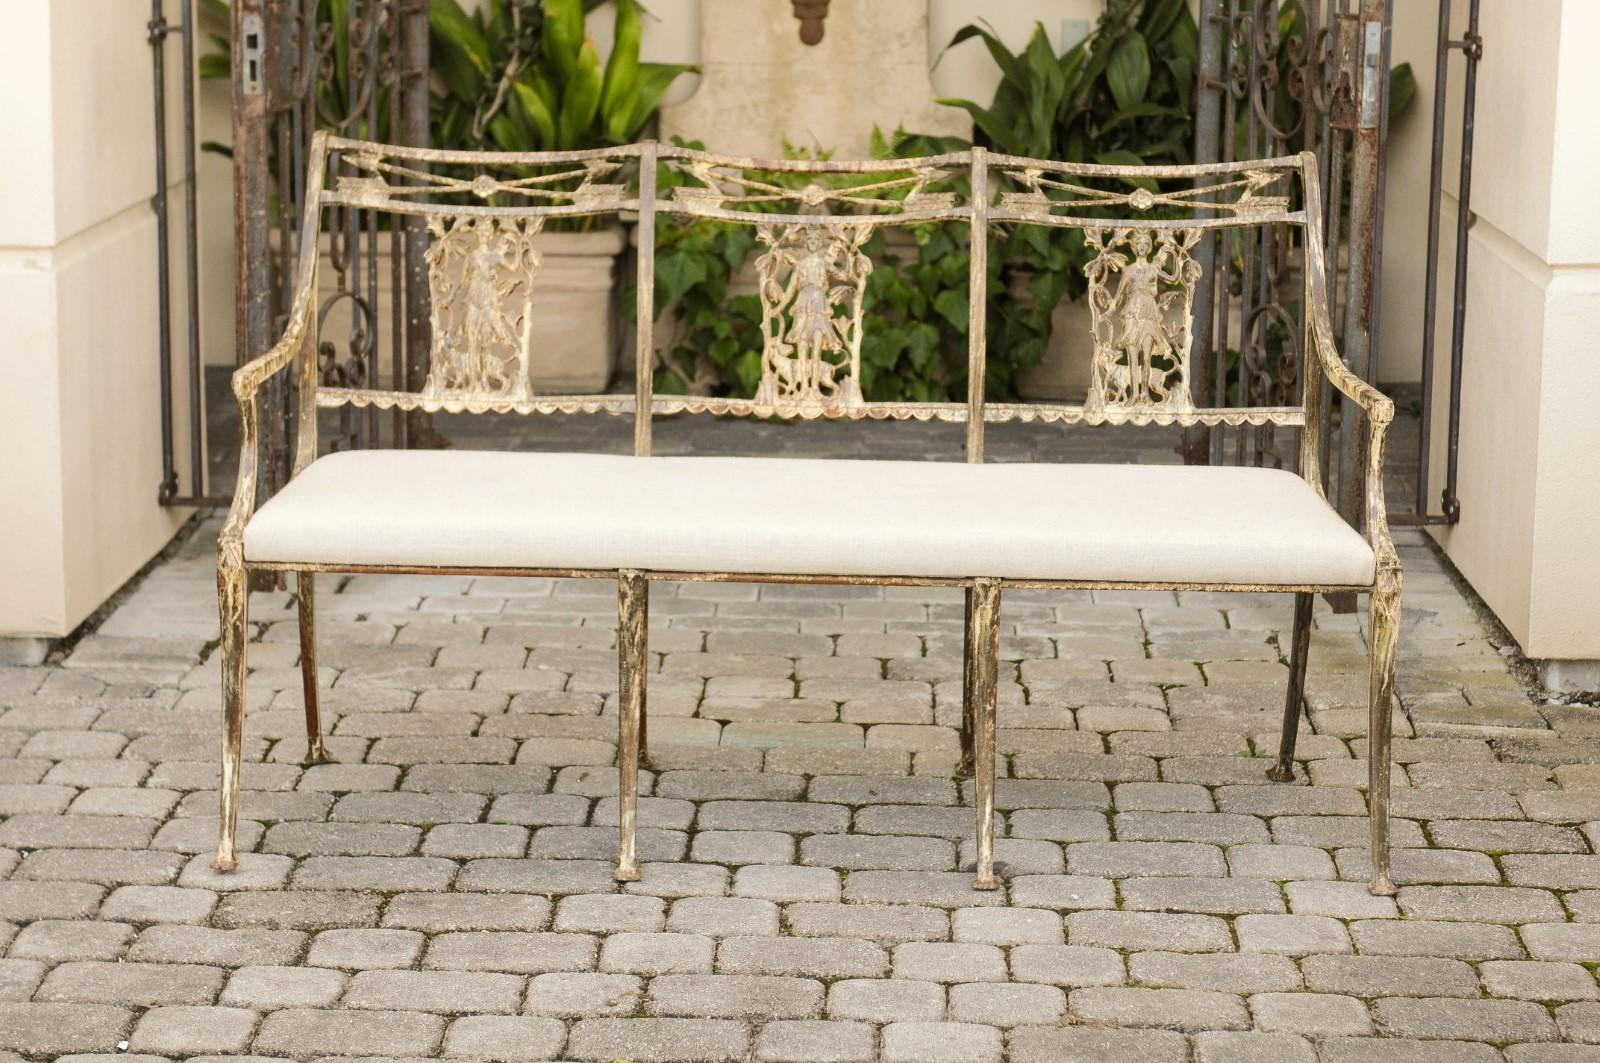 English Vintage Wrought-Iron Diana the Huntress Pattern Garden Bench with Upholstery For Sale